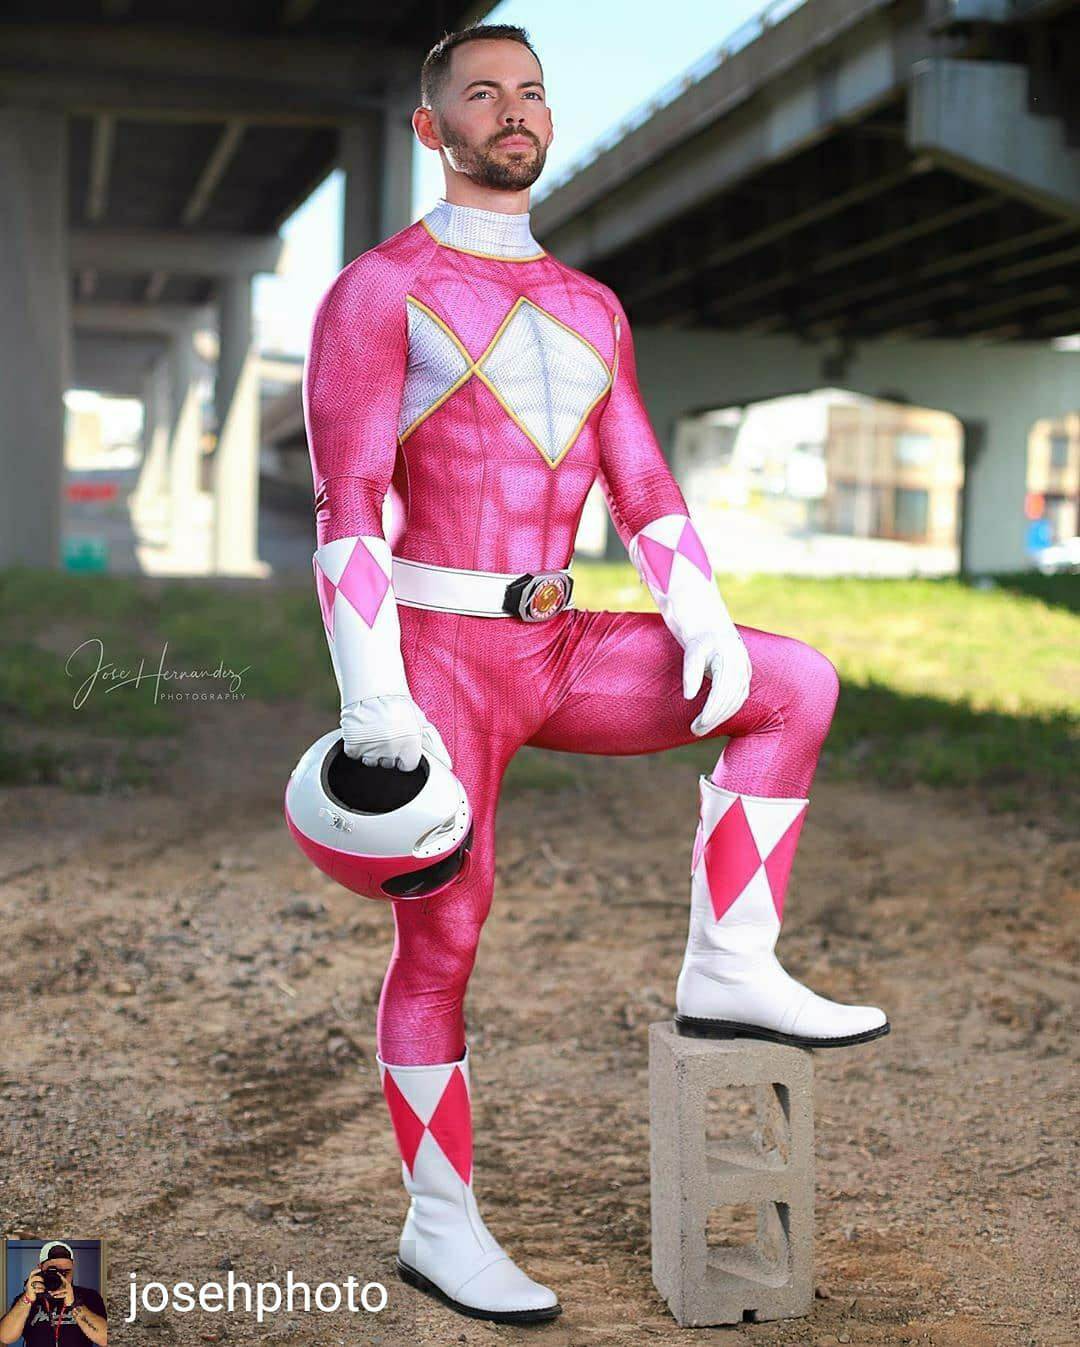 david tuller add pictures of the pink power ranger photo